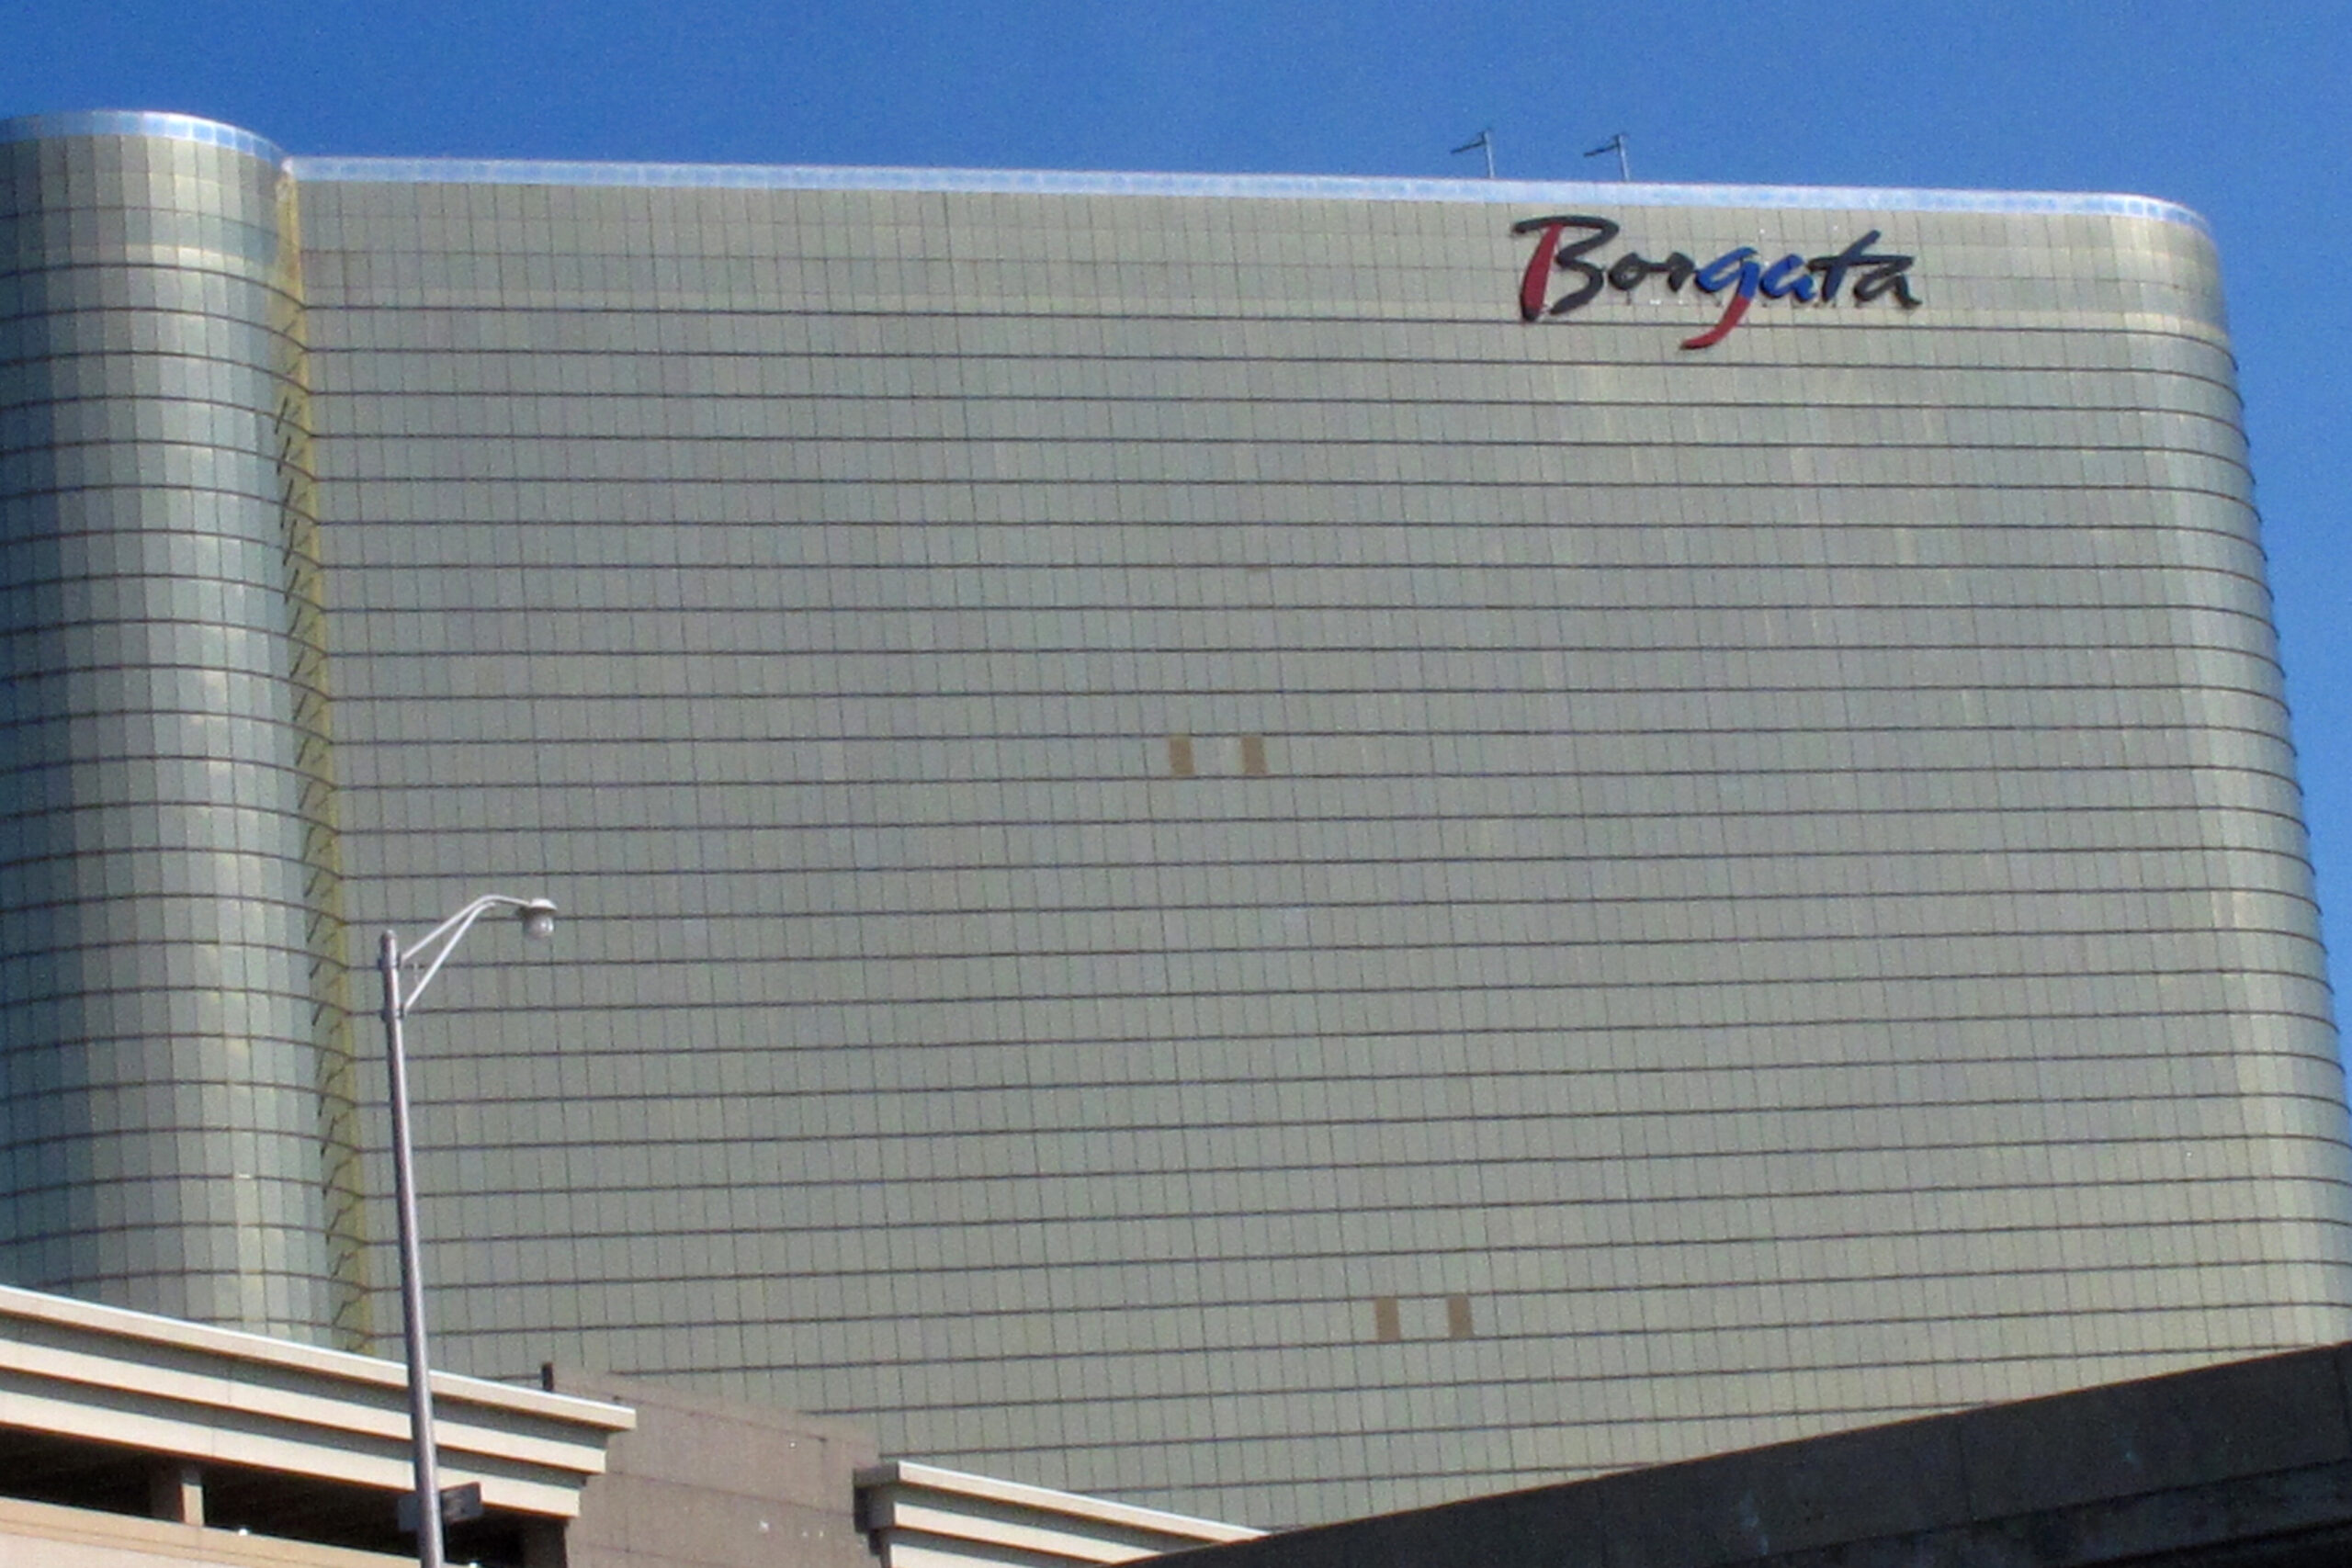 FILE - The exterior of the Borgata casino is seen Oct. 1, 2020. On Sept. 28, 2022 in Atlantic City,...